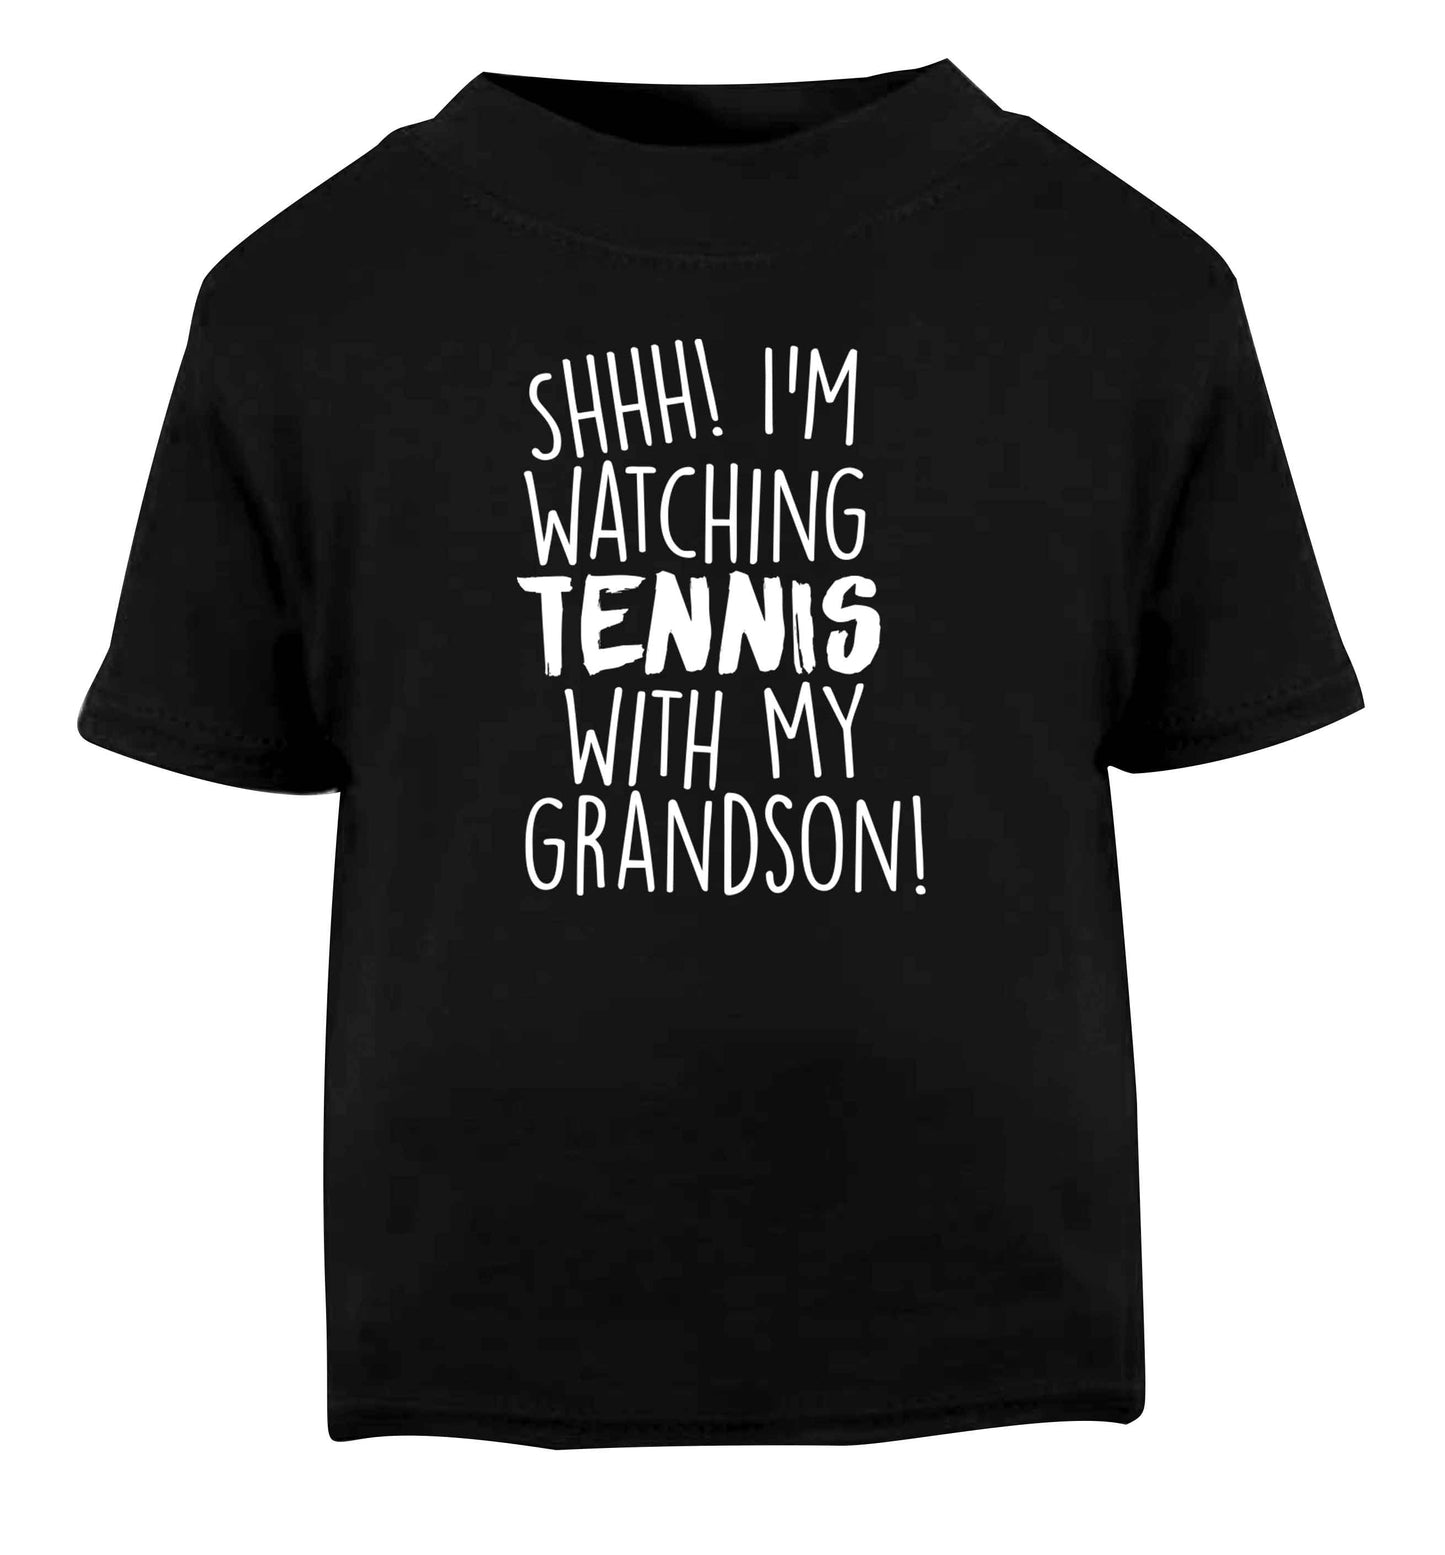 Shh! I'm watching tennis with my grandson! Black Baby Toddler Tshirt 2 years